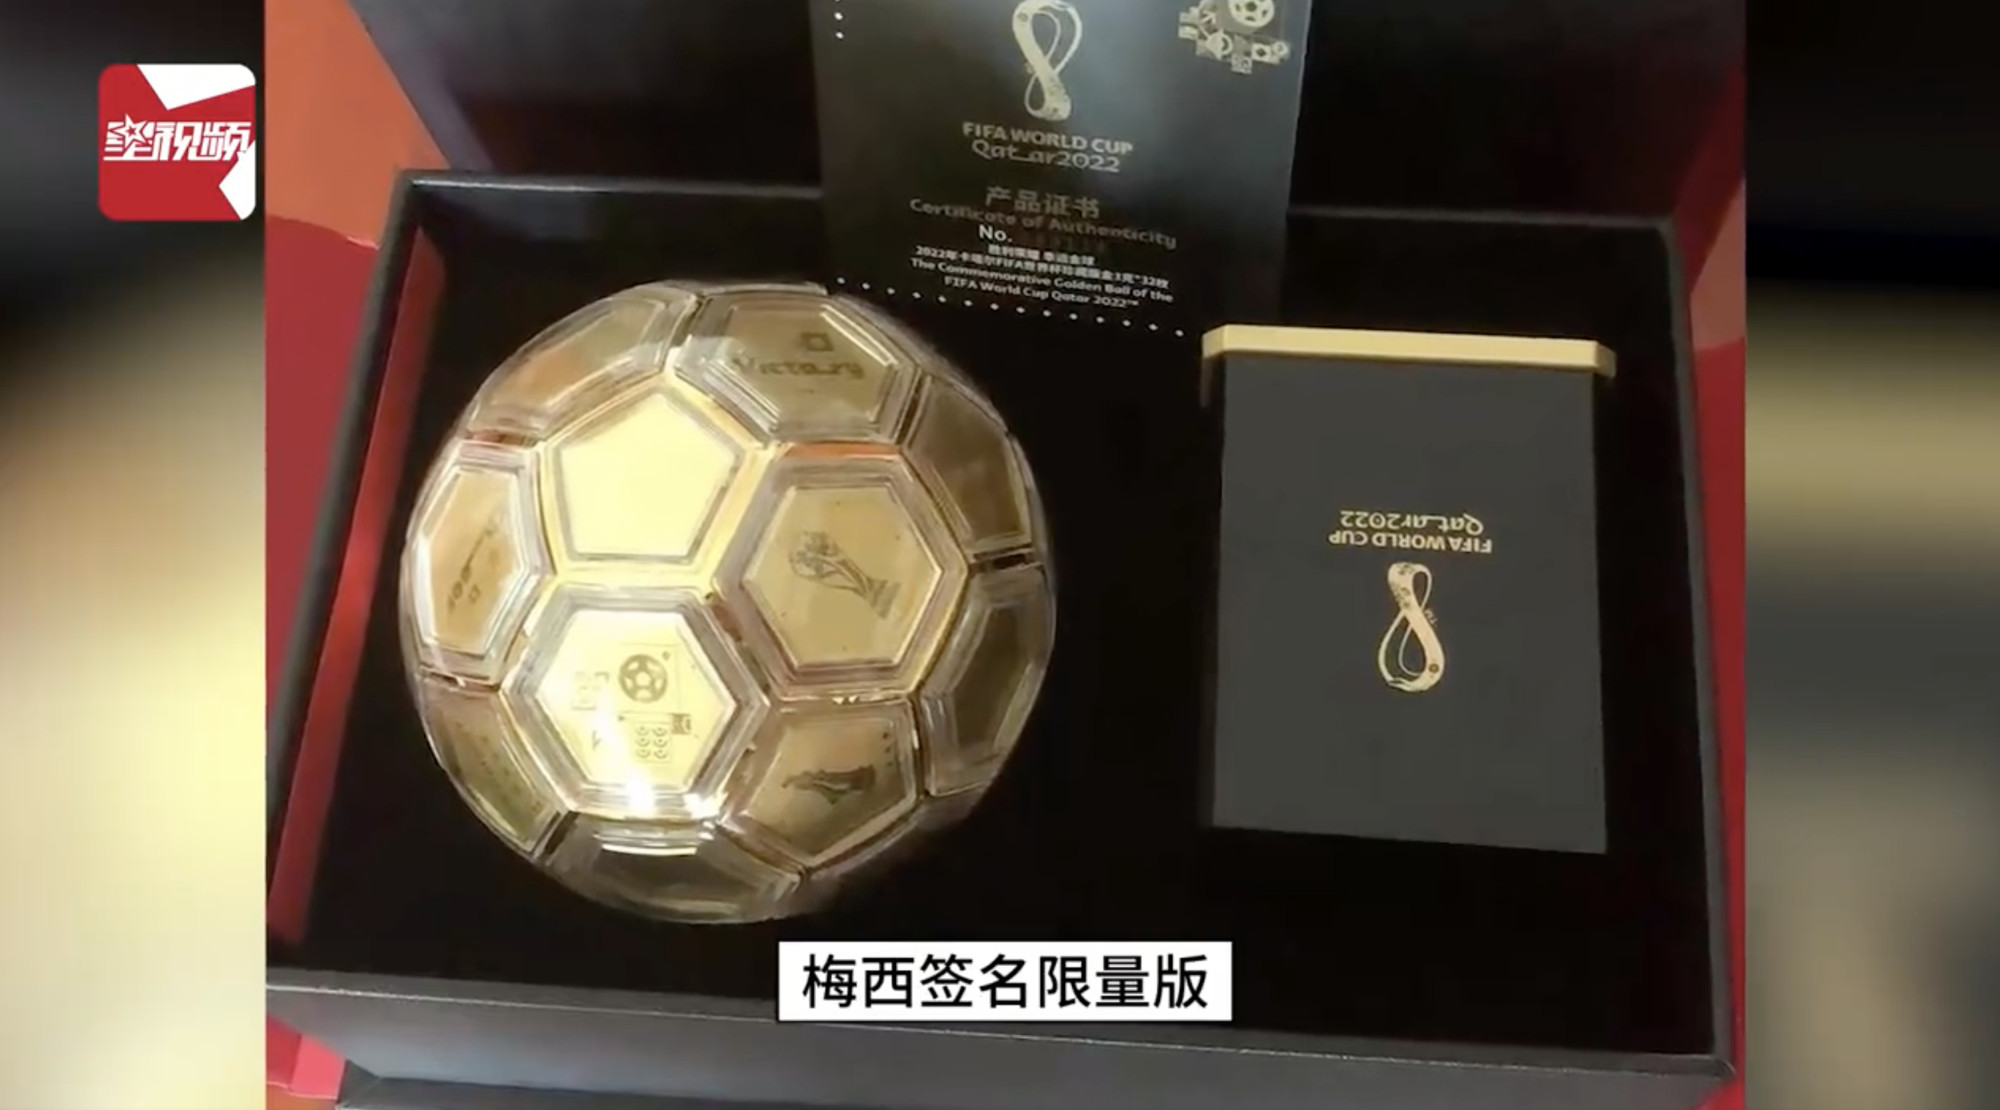 Official authenti The Commemorative Golden ball of FIFA World Cup Qatar 2022